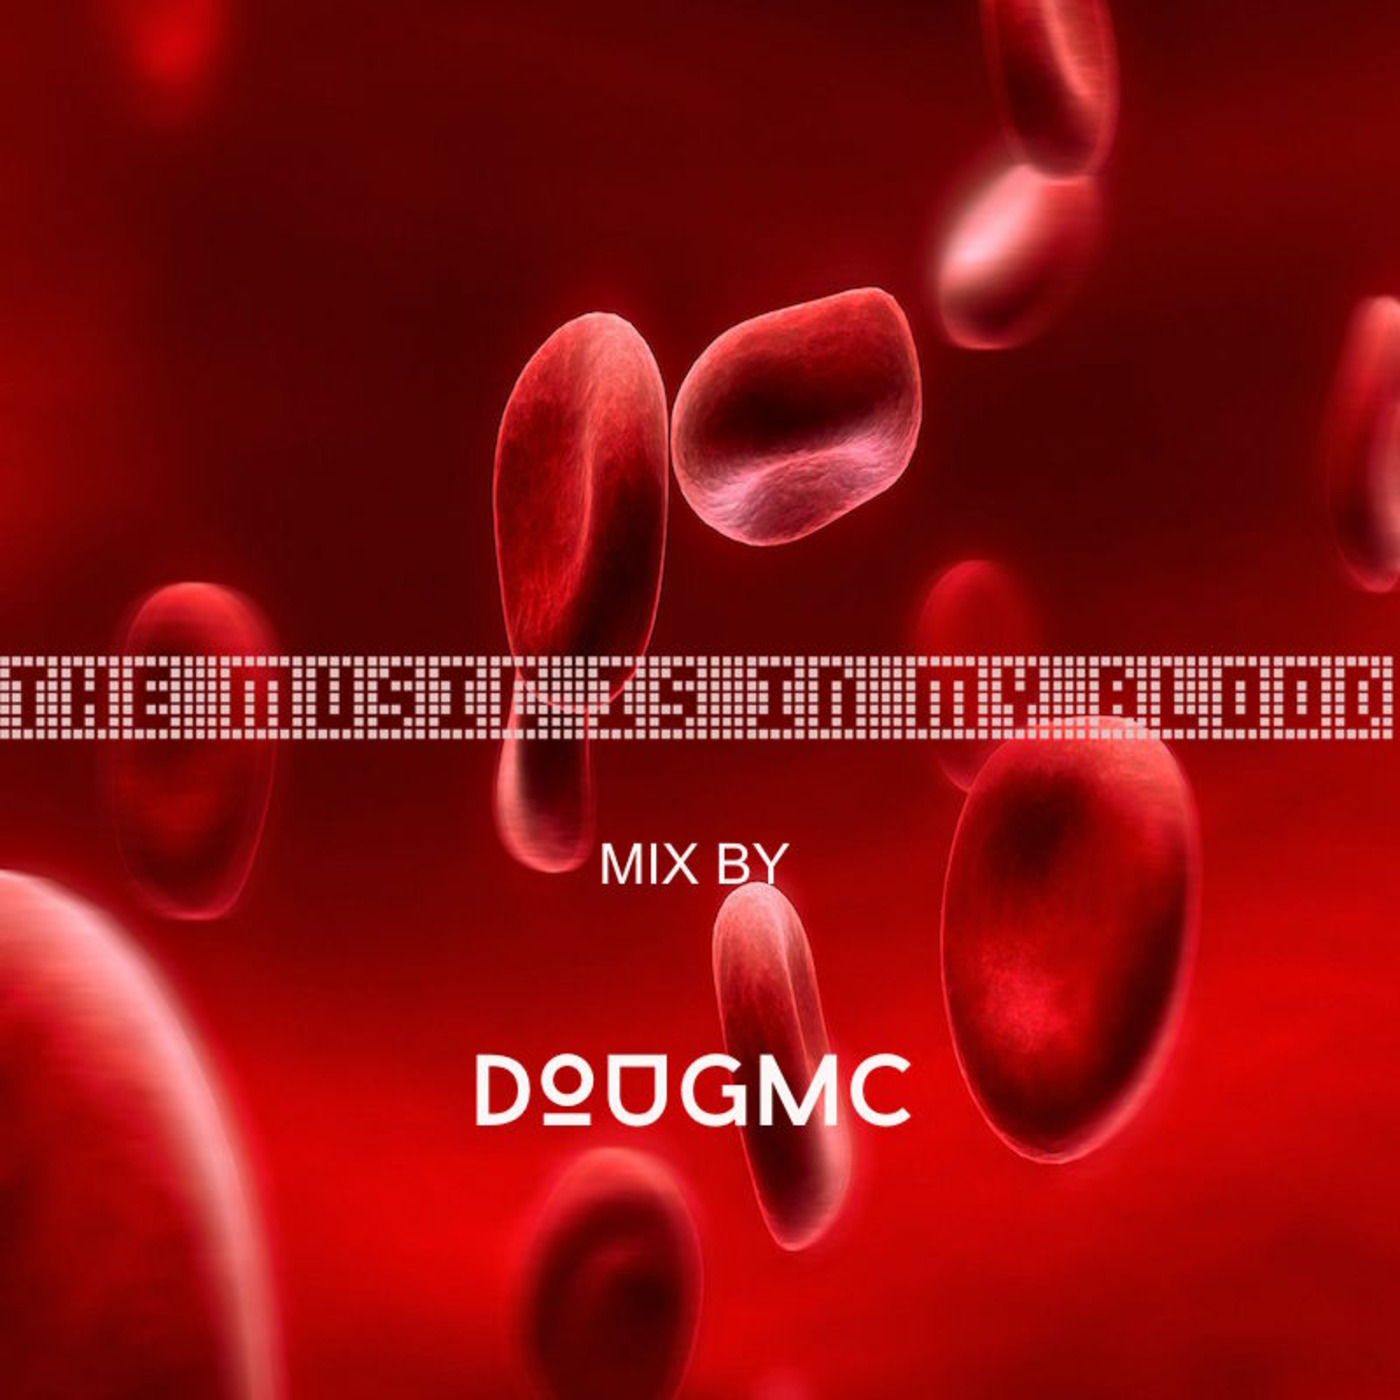 The Music Is In My Blood - Mix by Dougmc